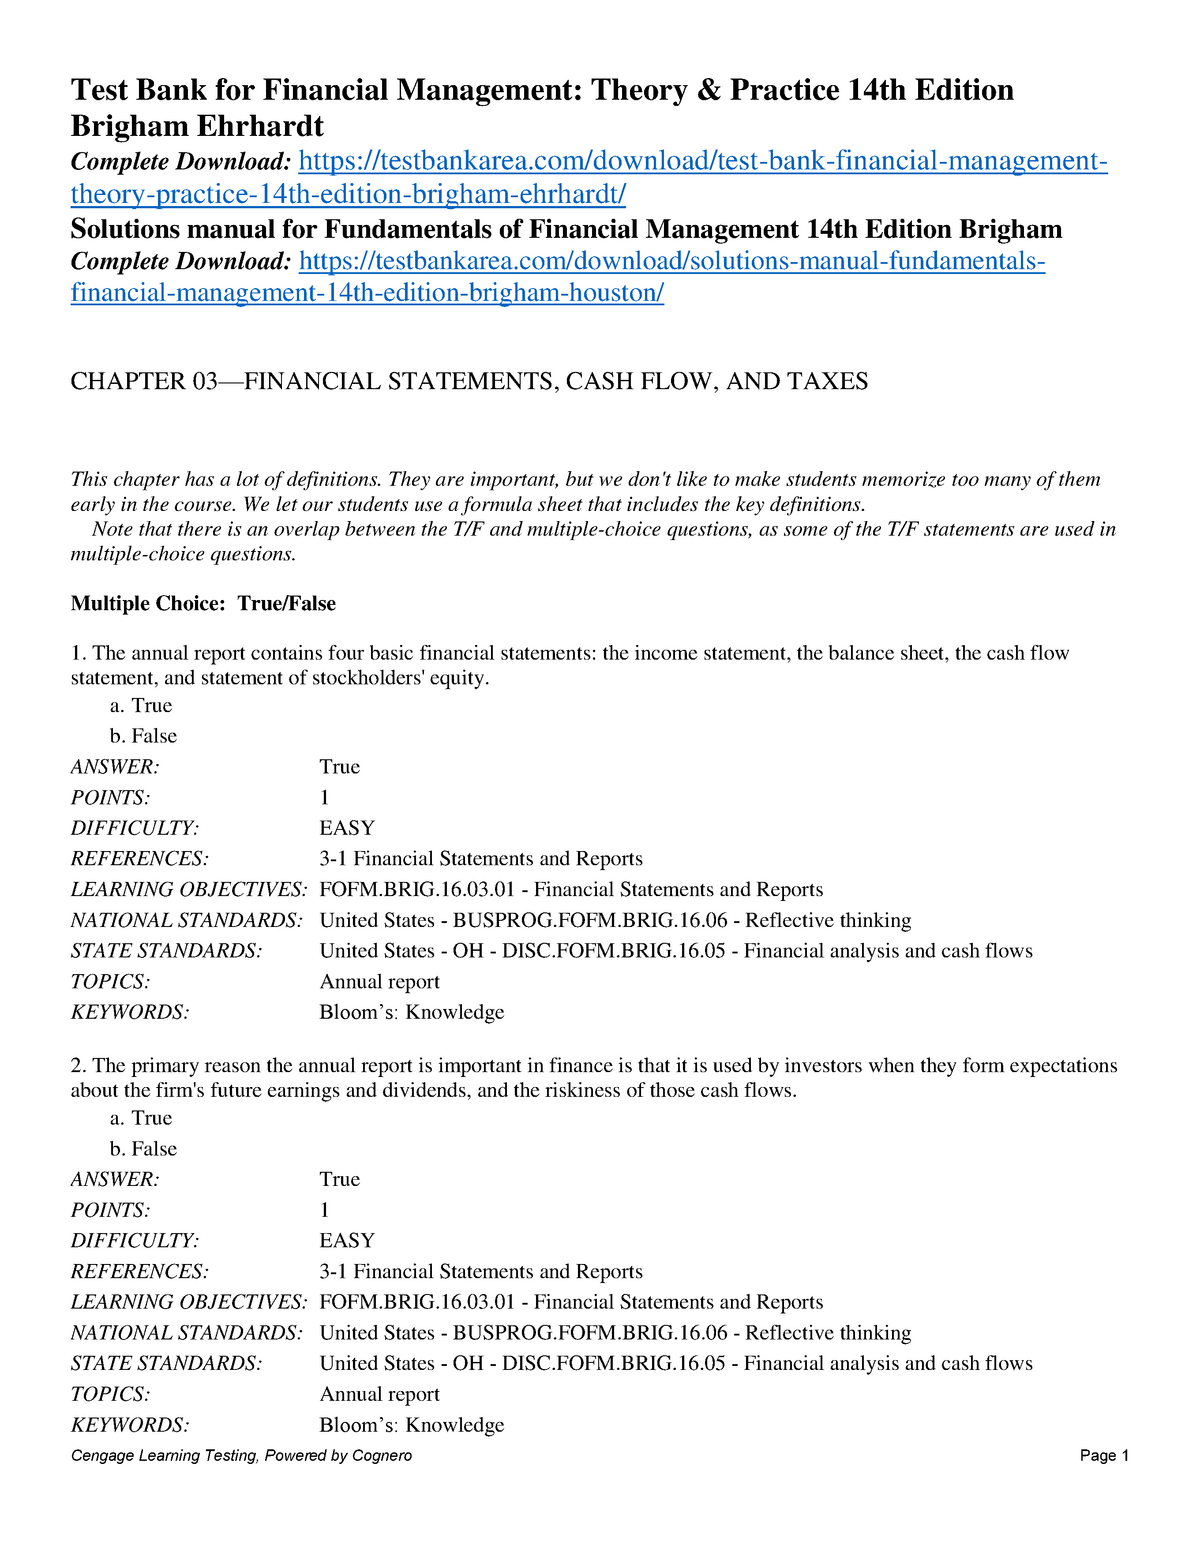 Fundamentals of financial management test study guide